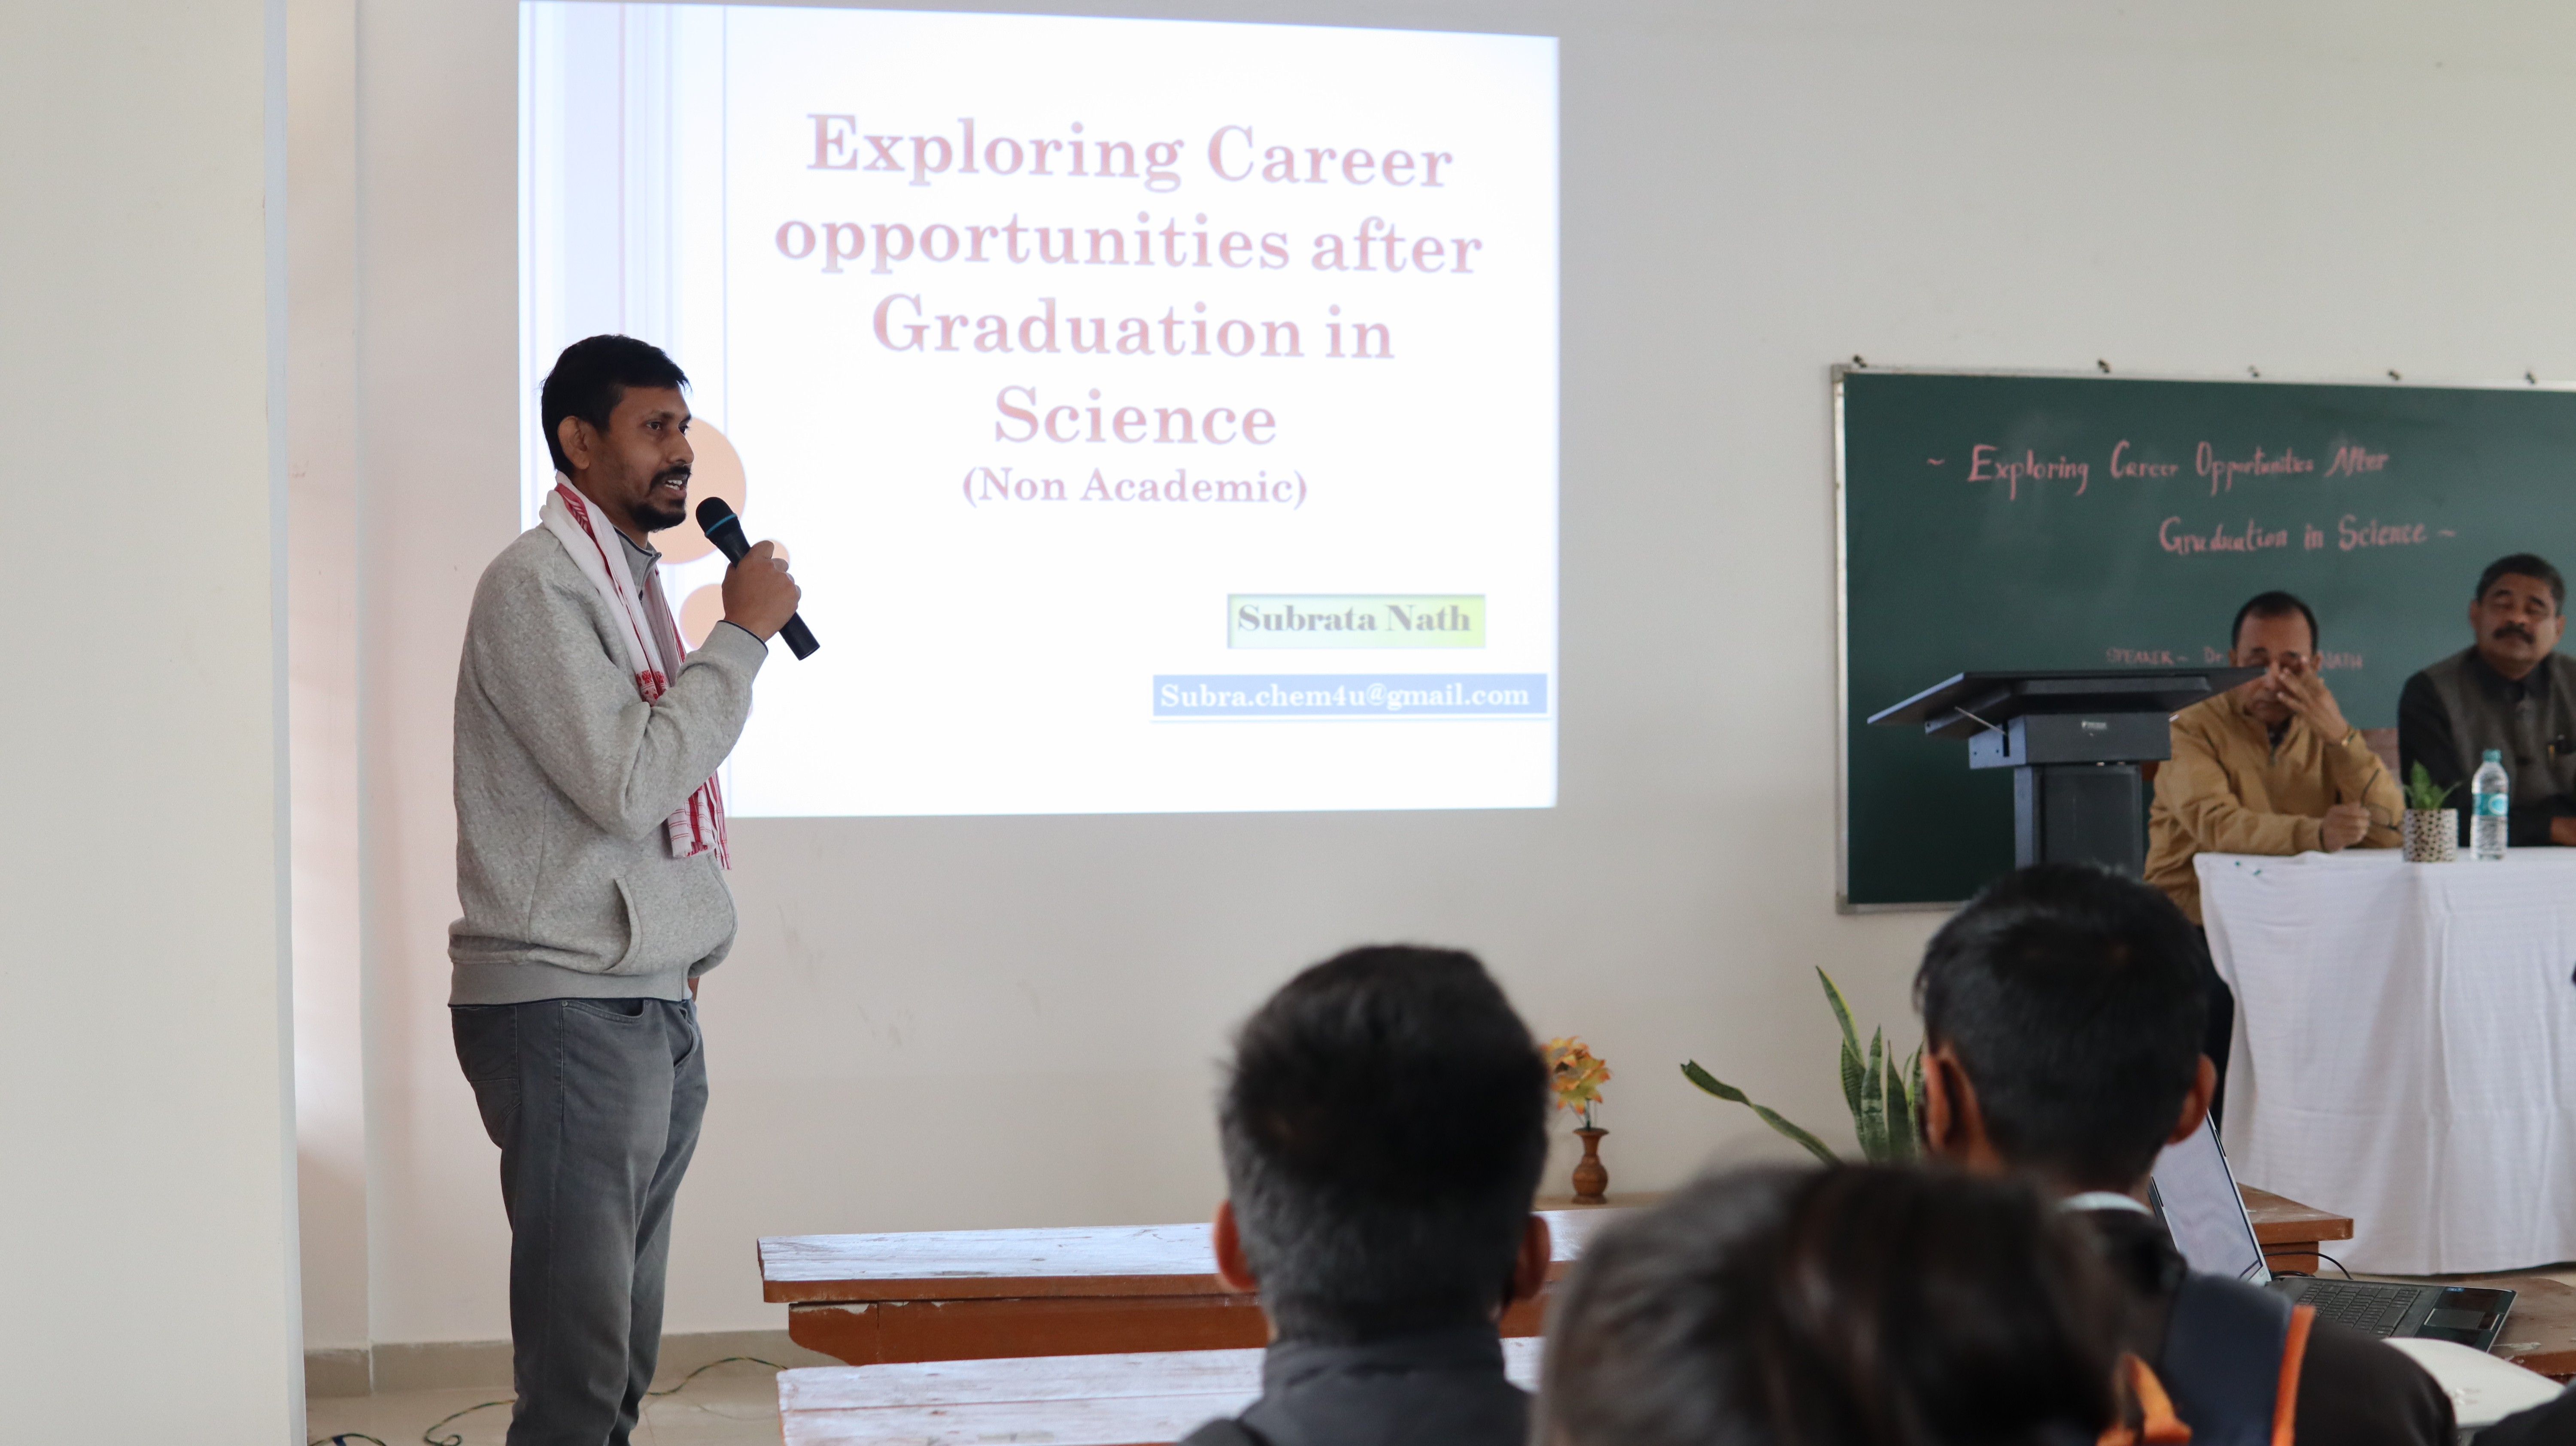 Lecture on Career Opportunities after Graduating in Science